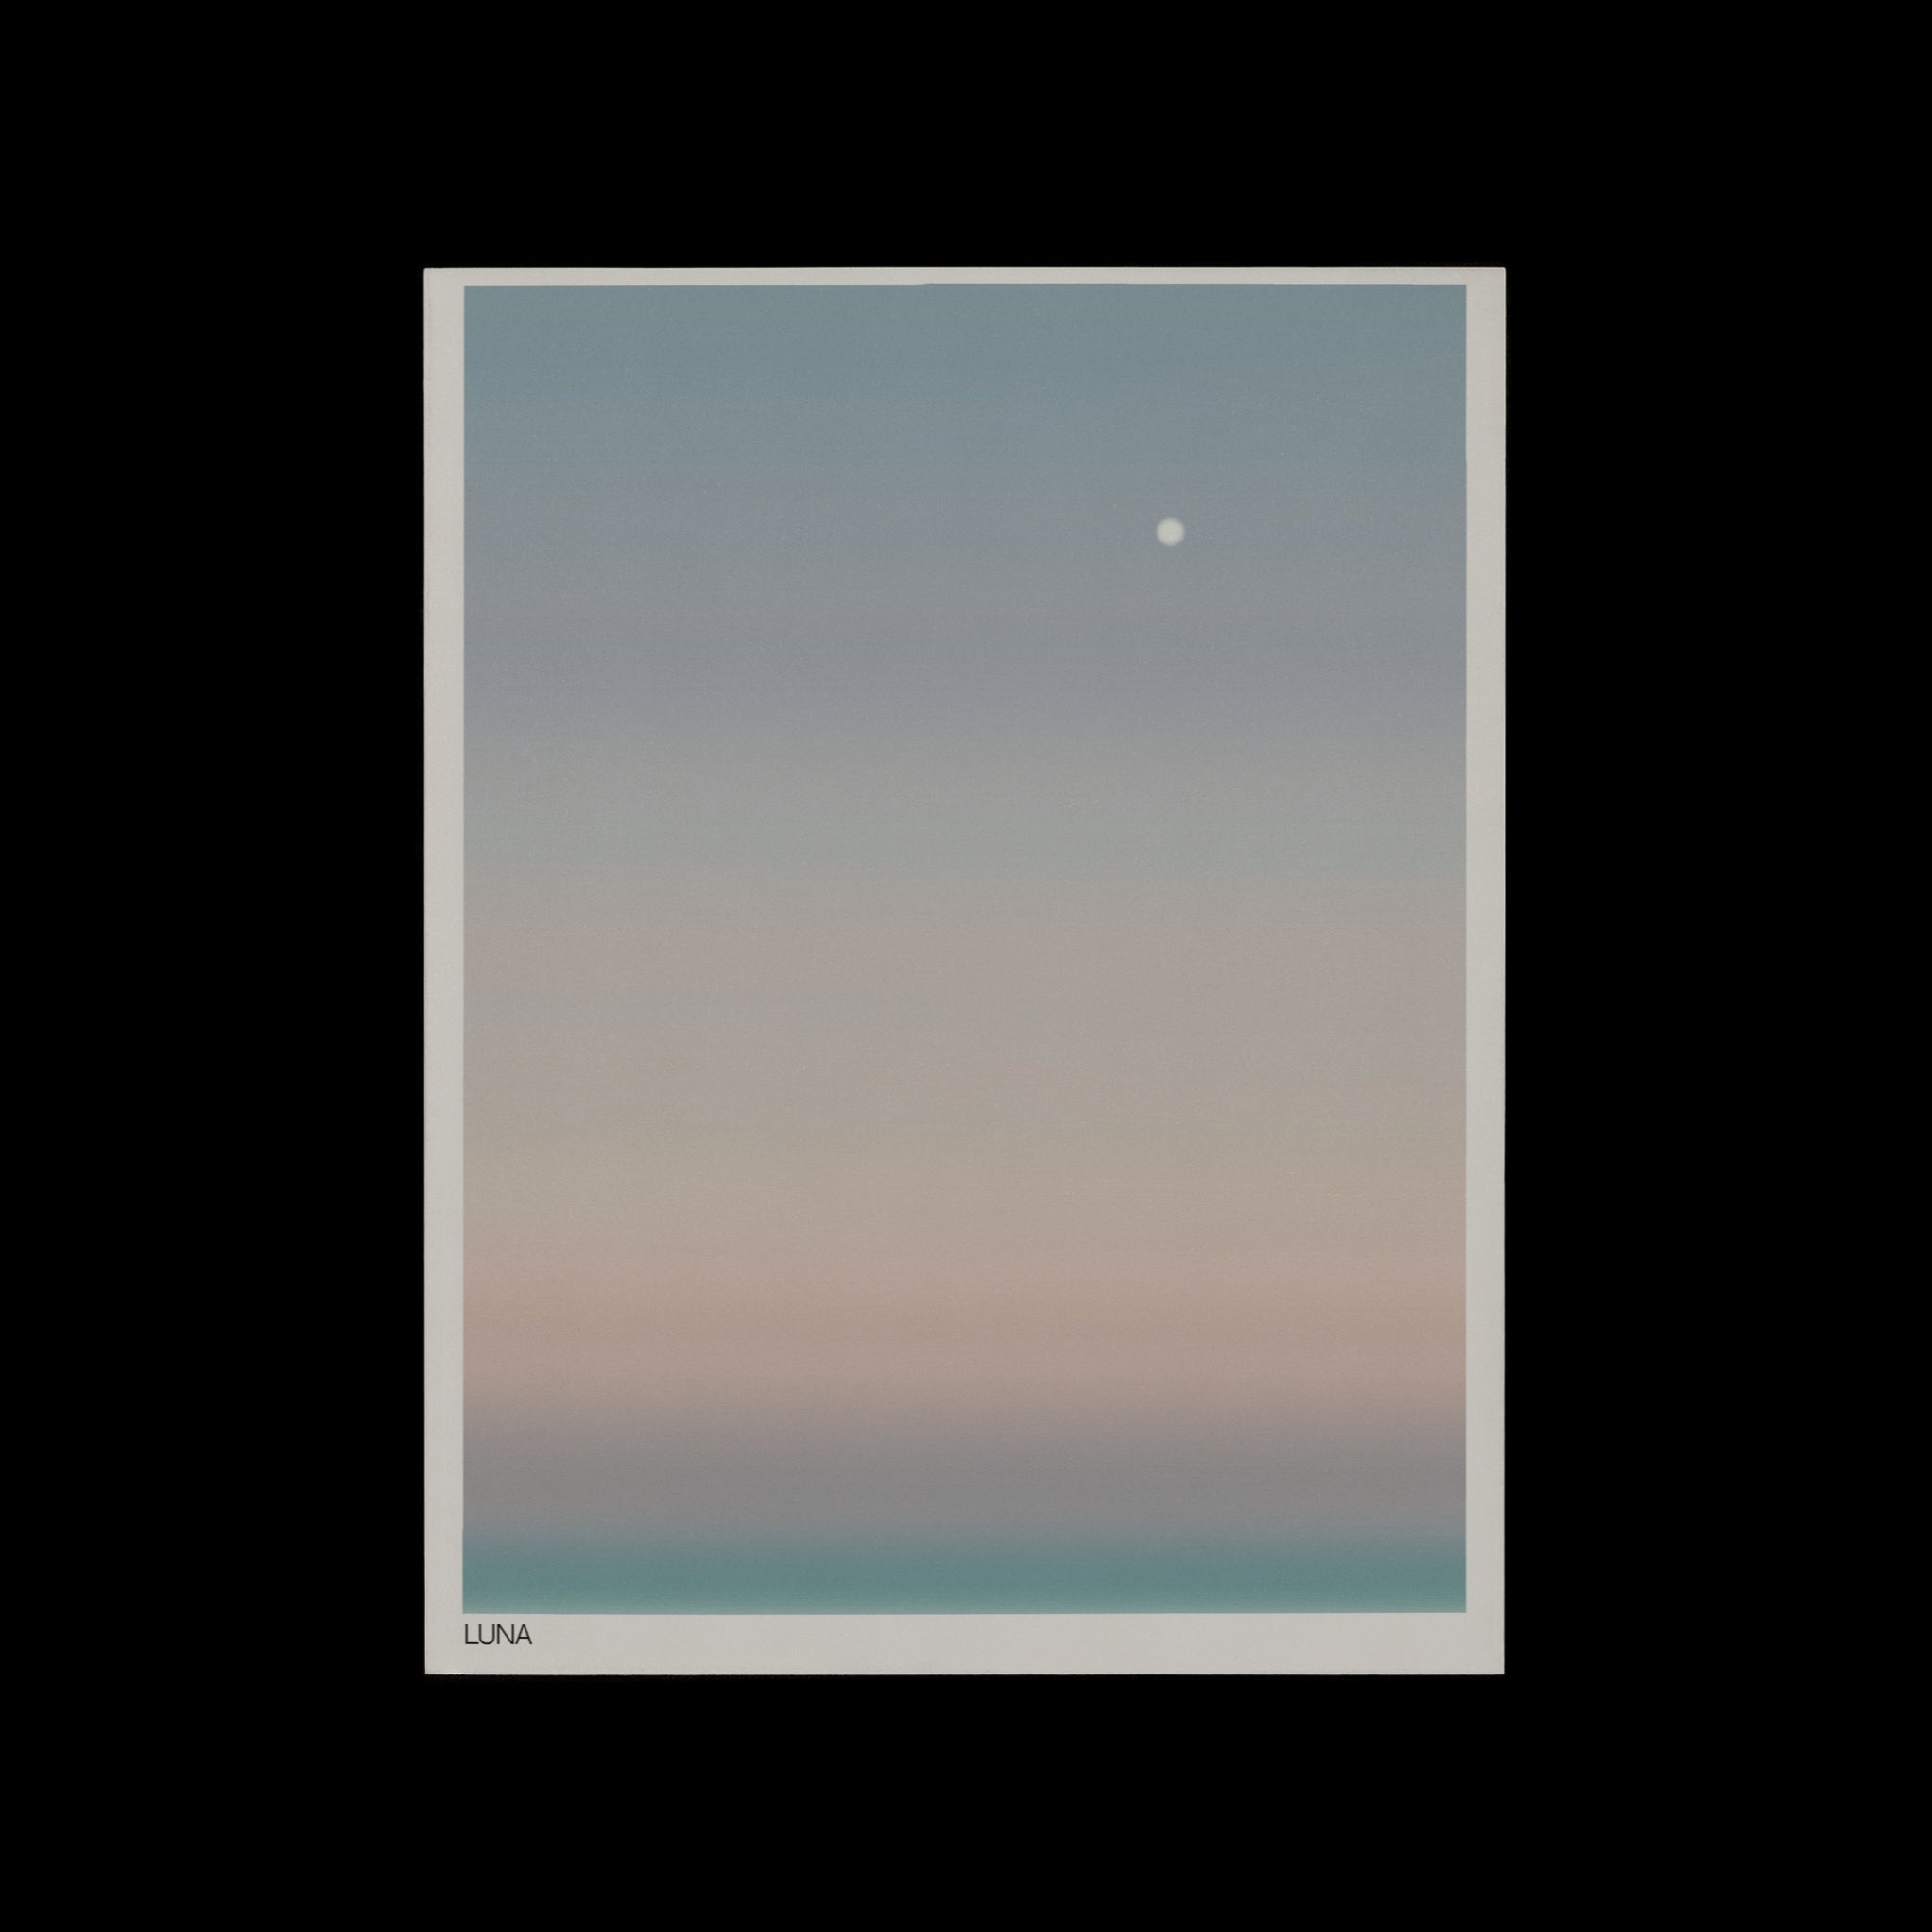 Aura Skies is a collection of wall art prints inspired from coastal sunsets and candy colored skies. The abstract aura posters with dreamy gradients are an aesthetic wall decor must have perfect for dorm or apartment decor.